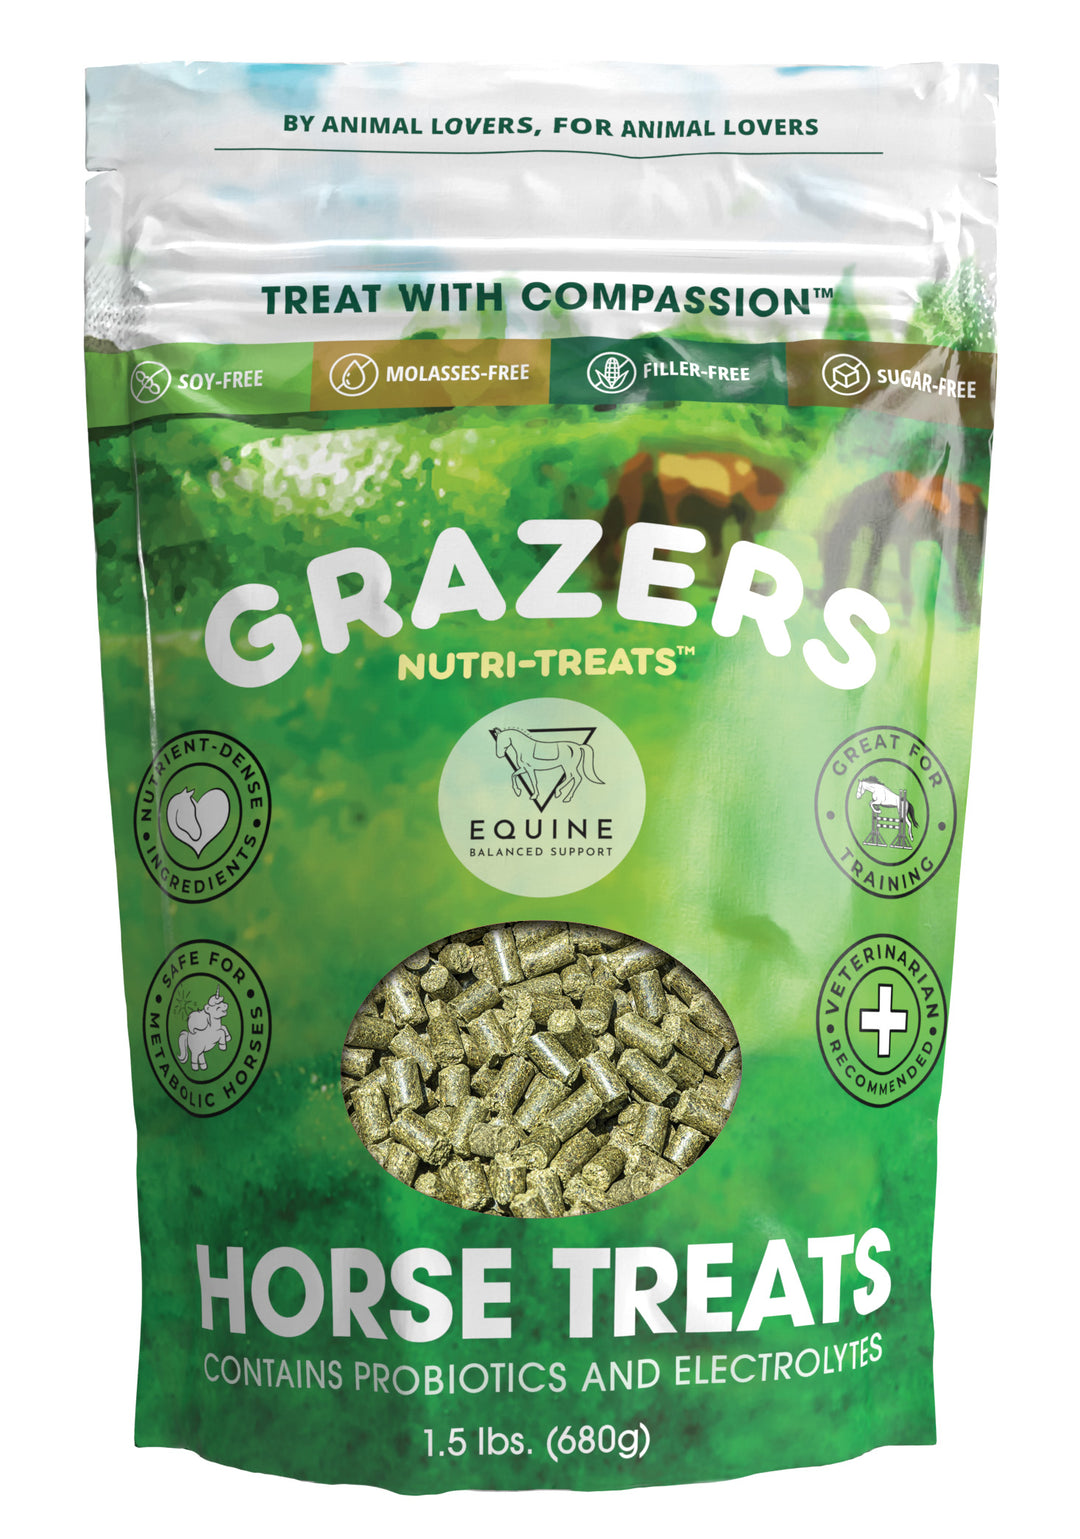 Grazers Nutri-Treats - Healthy Horse Treat (1.5 lb). Daily, General Health, Metabolic Safe, Nutrient-Rich Treats for Horses by Equine Balanced Support, Nutrient-Dense Horse Treats, Healthy Horse Treats, Species-Appropriate Animal Treats